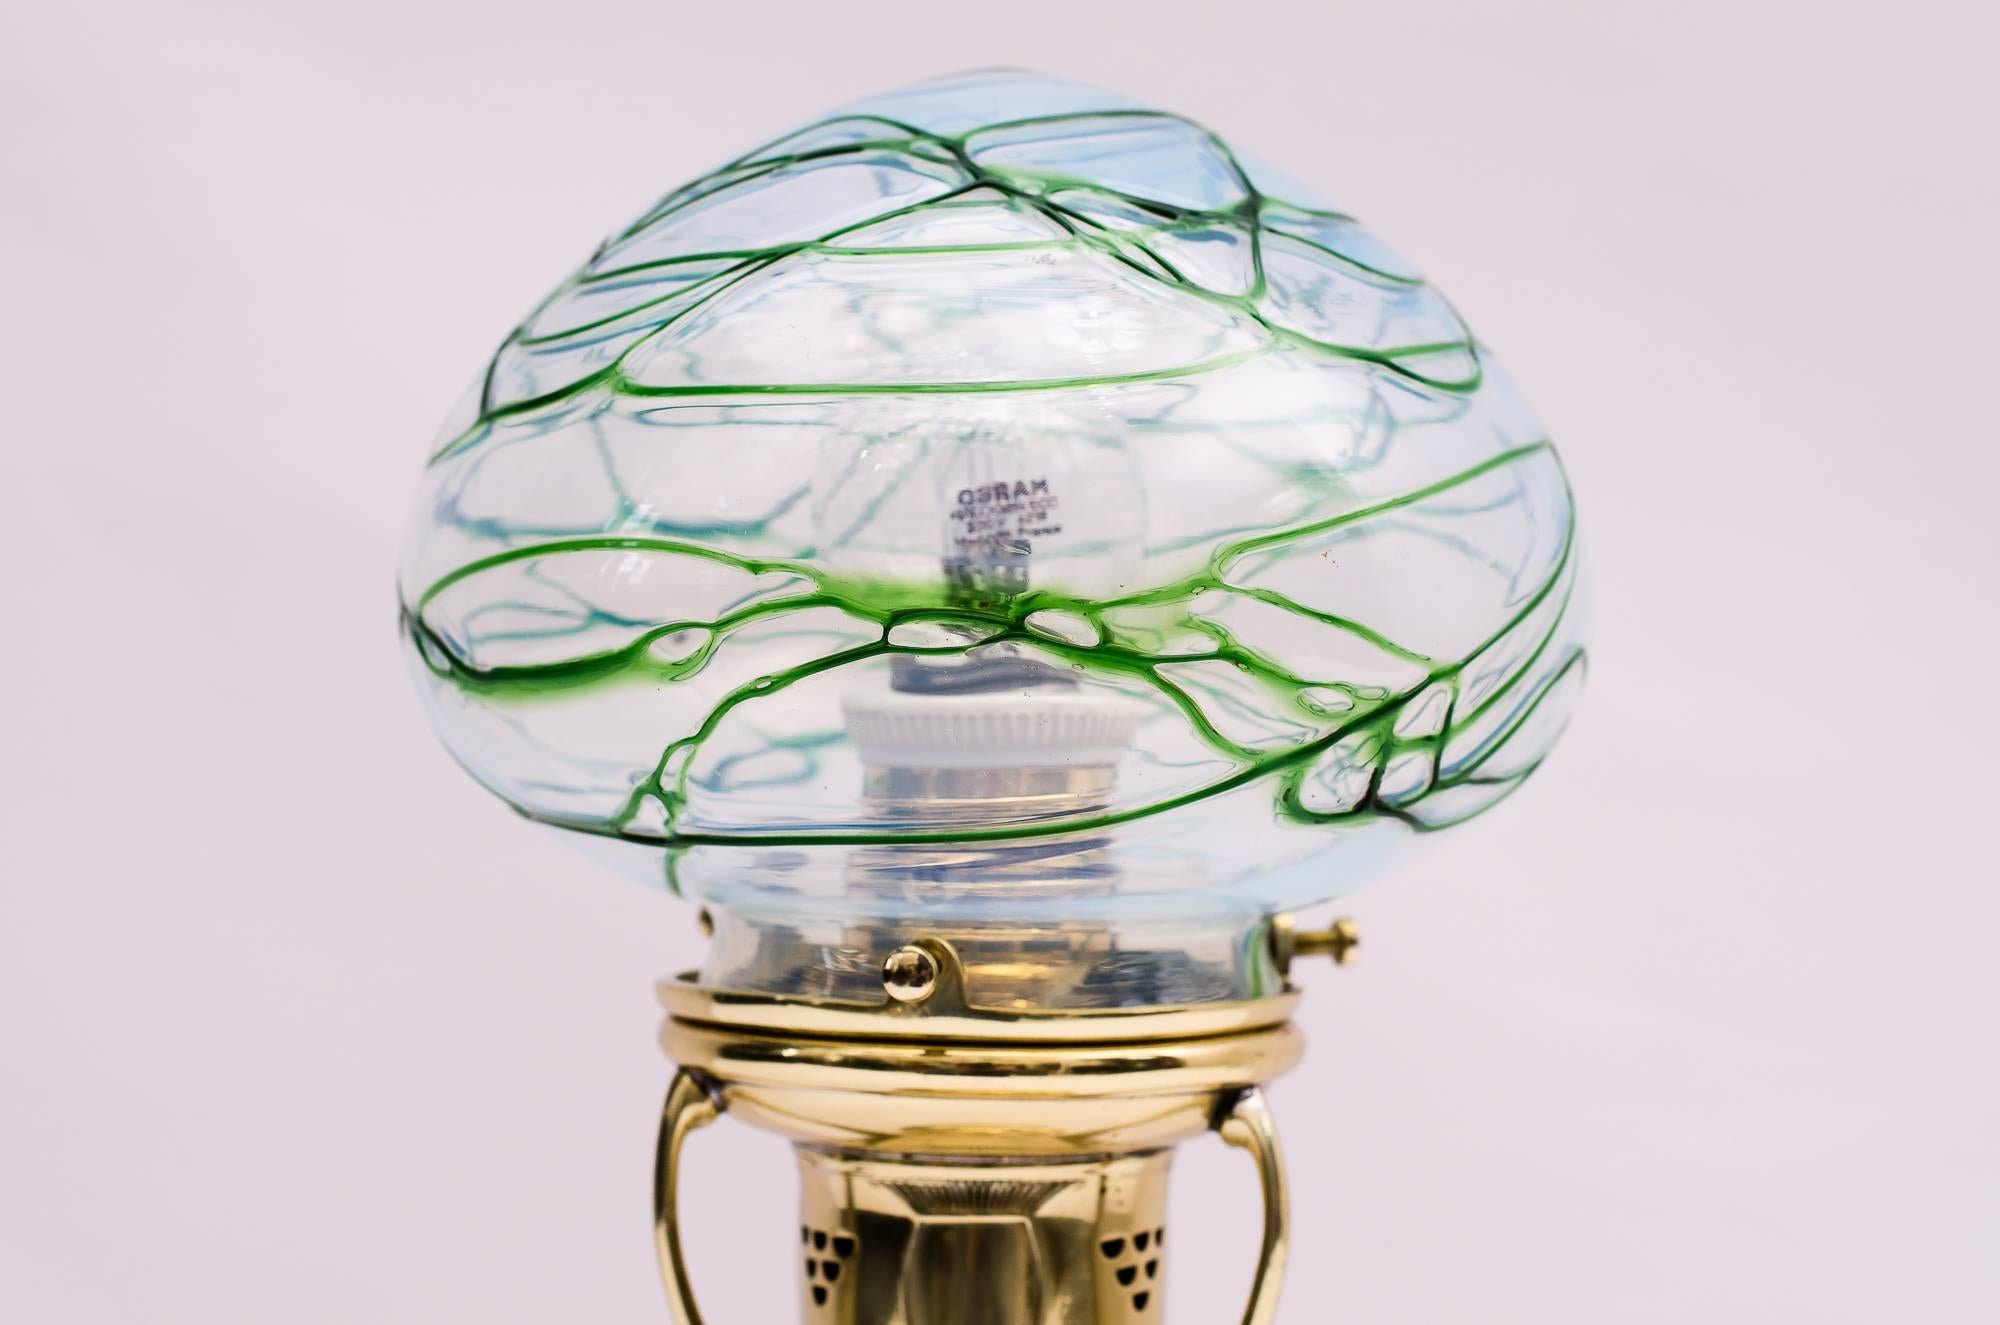 Very beautiful table lamp with original Pallme König glass shade, circa 1908
Polished and stove enameled.